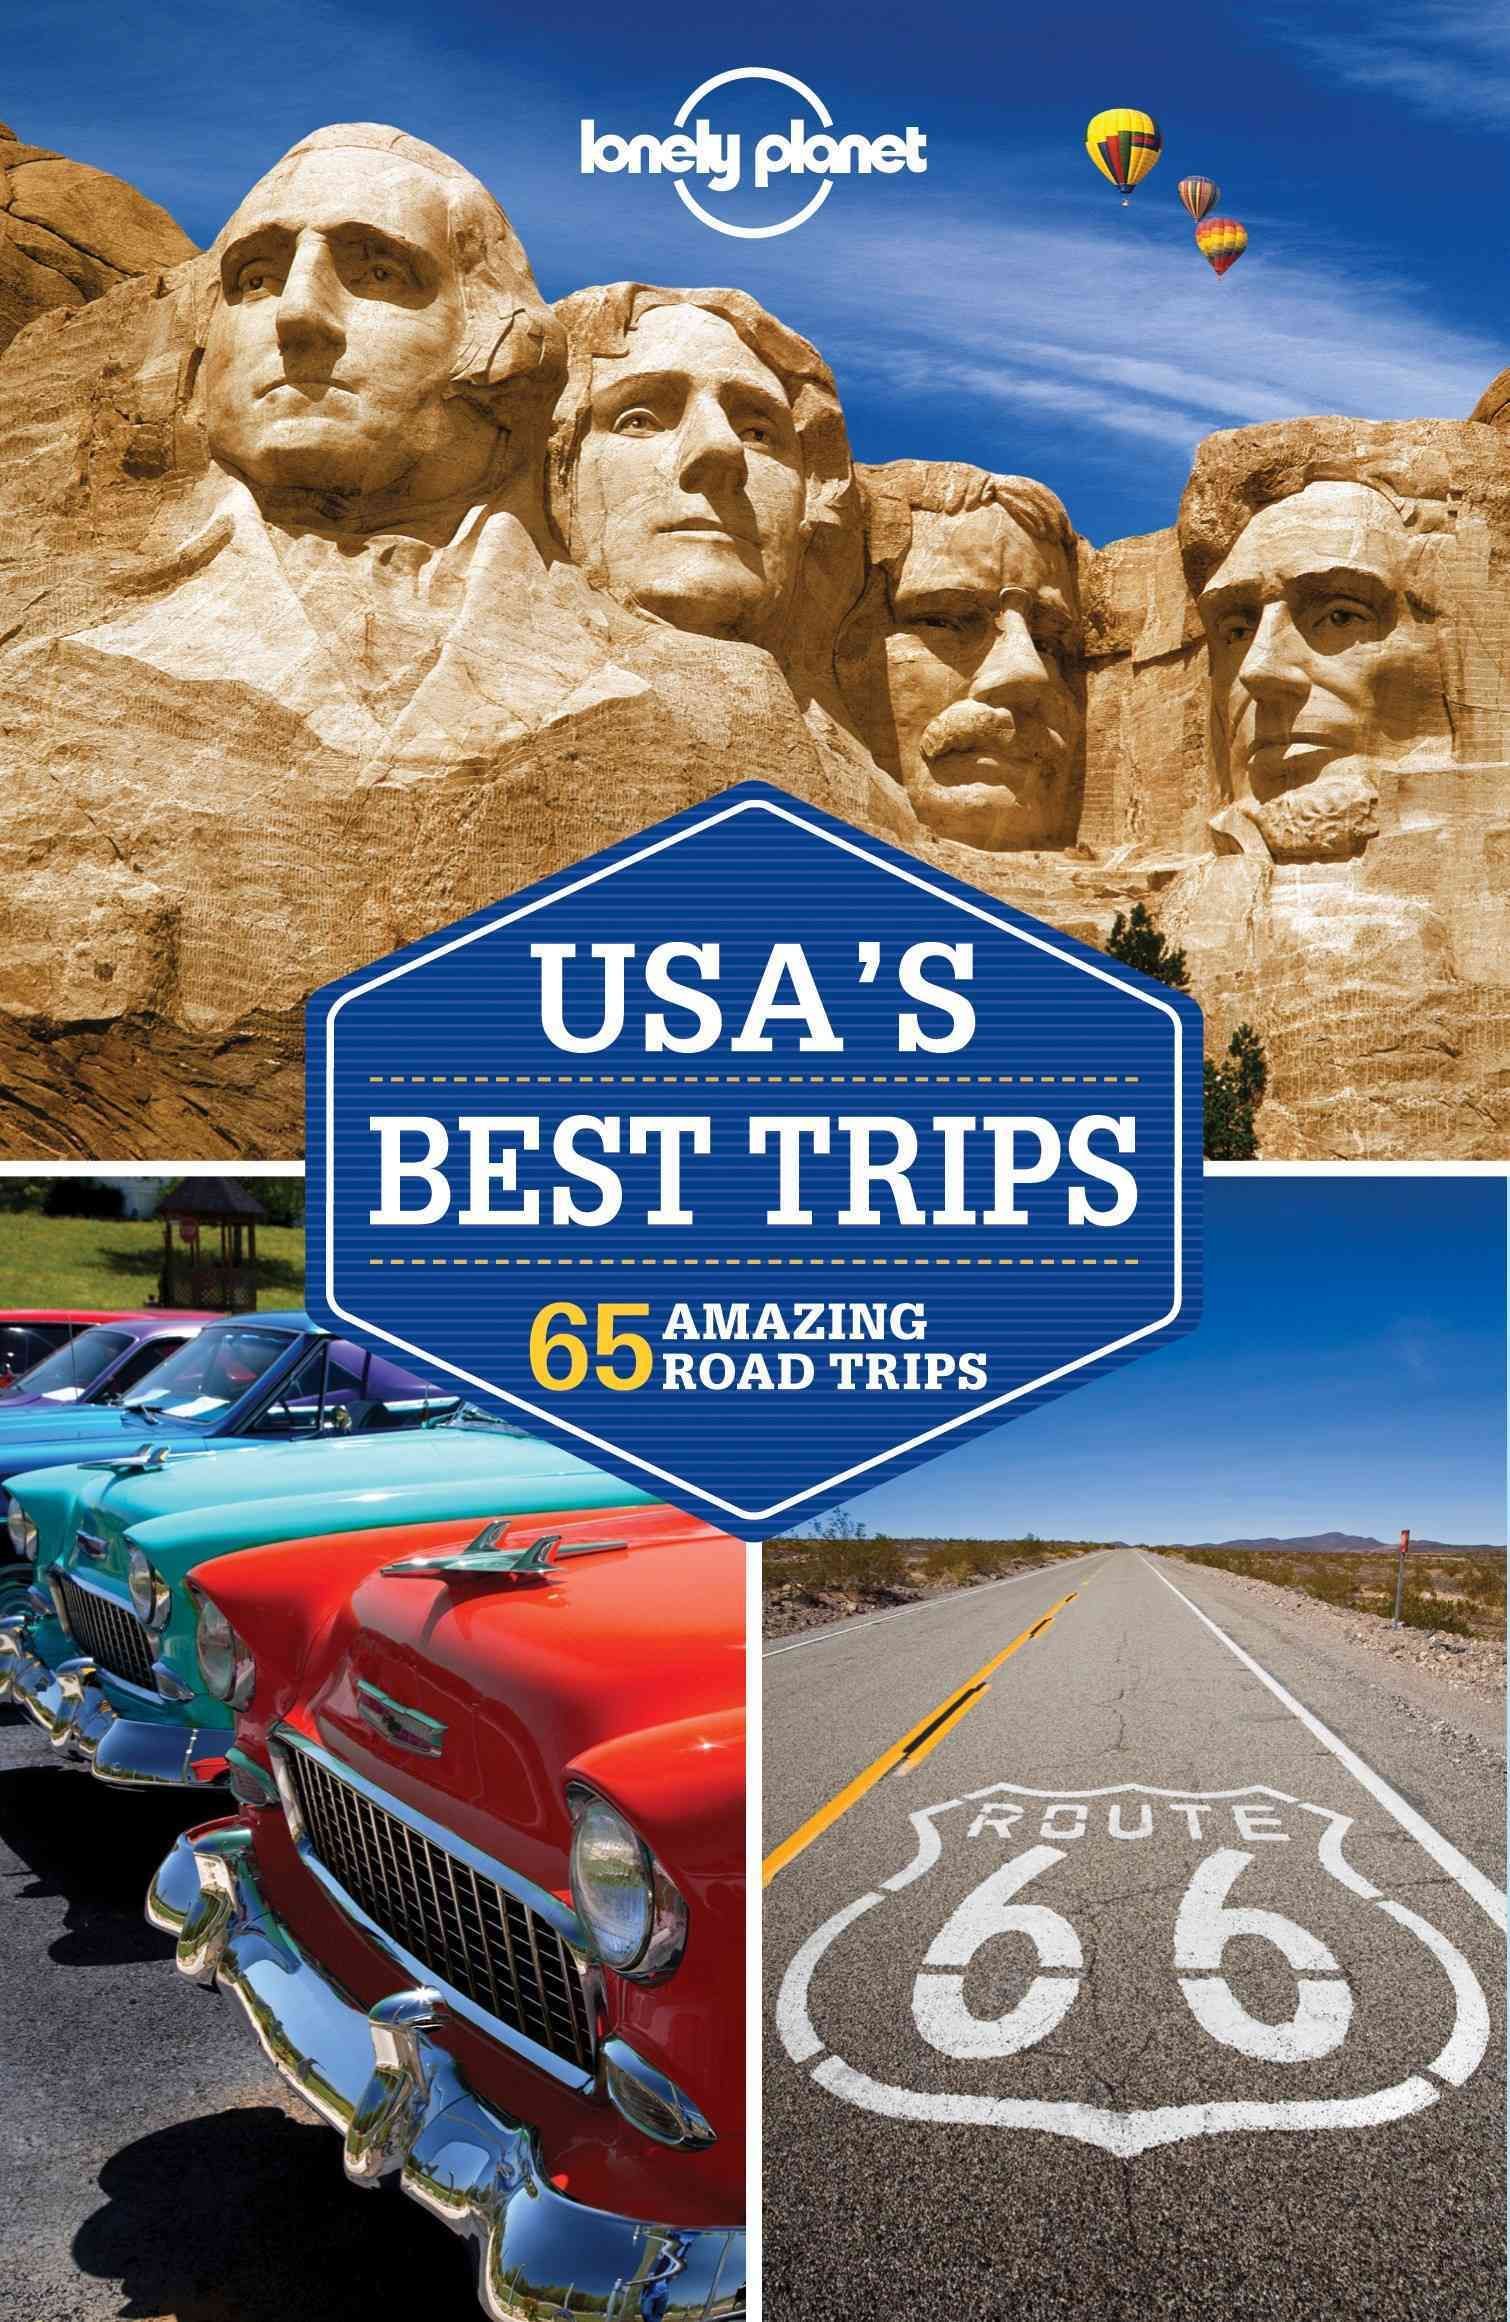 lonely planet western usa travel guide